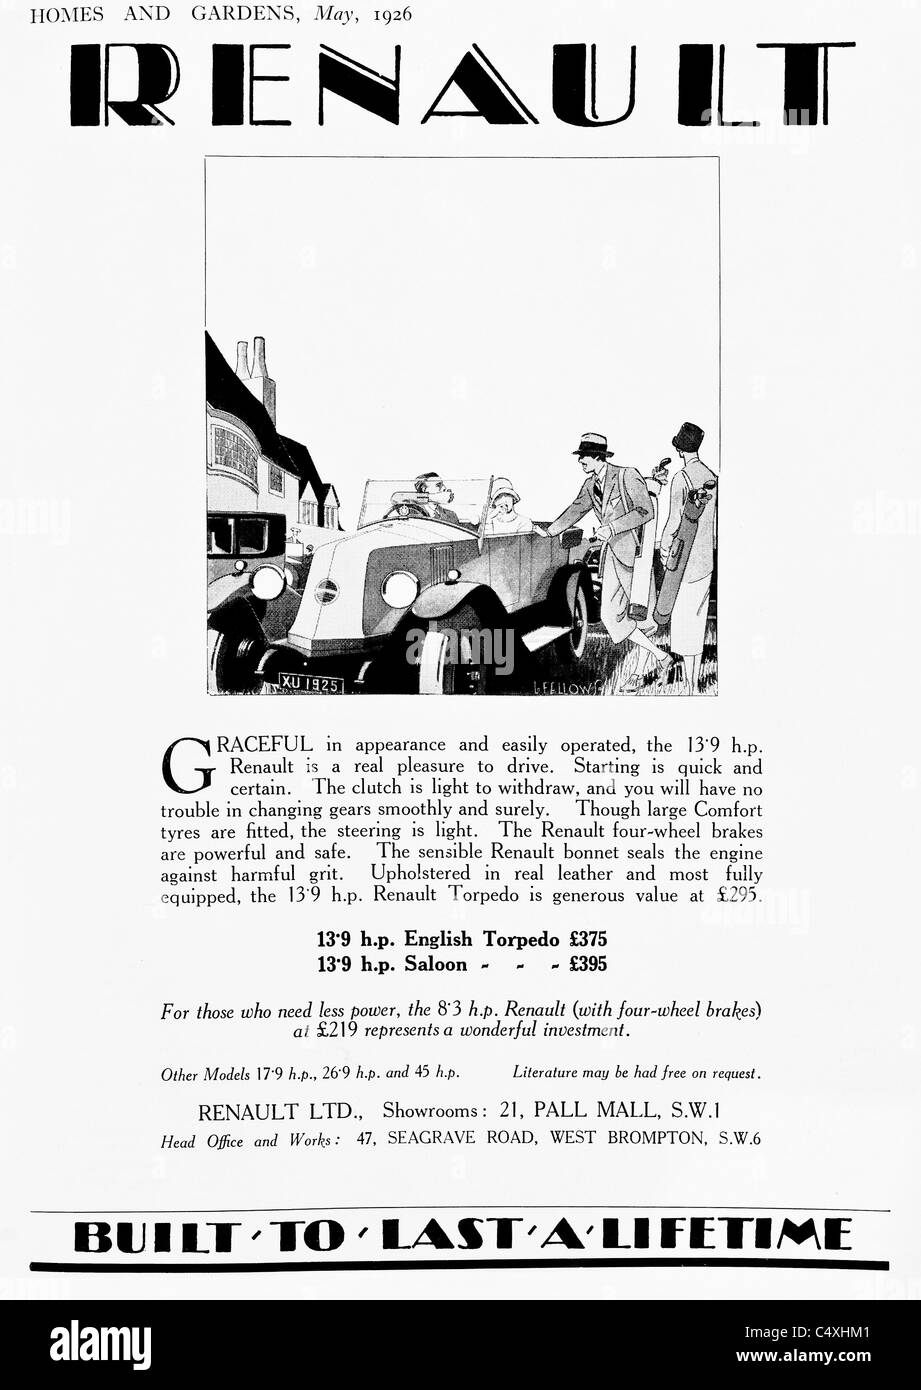 1926 'Renault' Car Advertisement from 'Homes and Gardens' magazine. Stock Photo